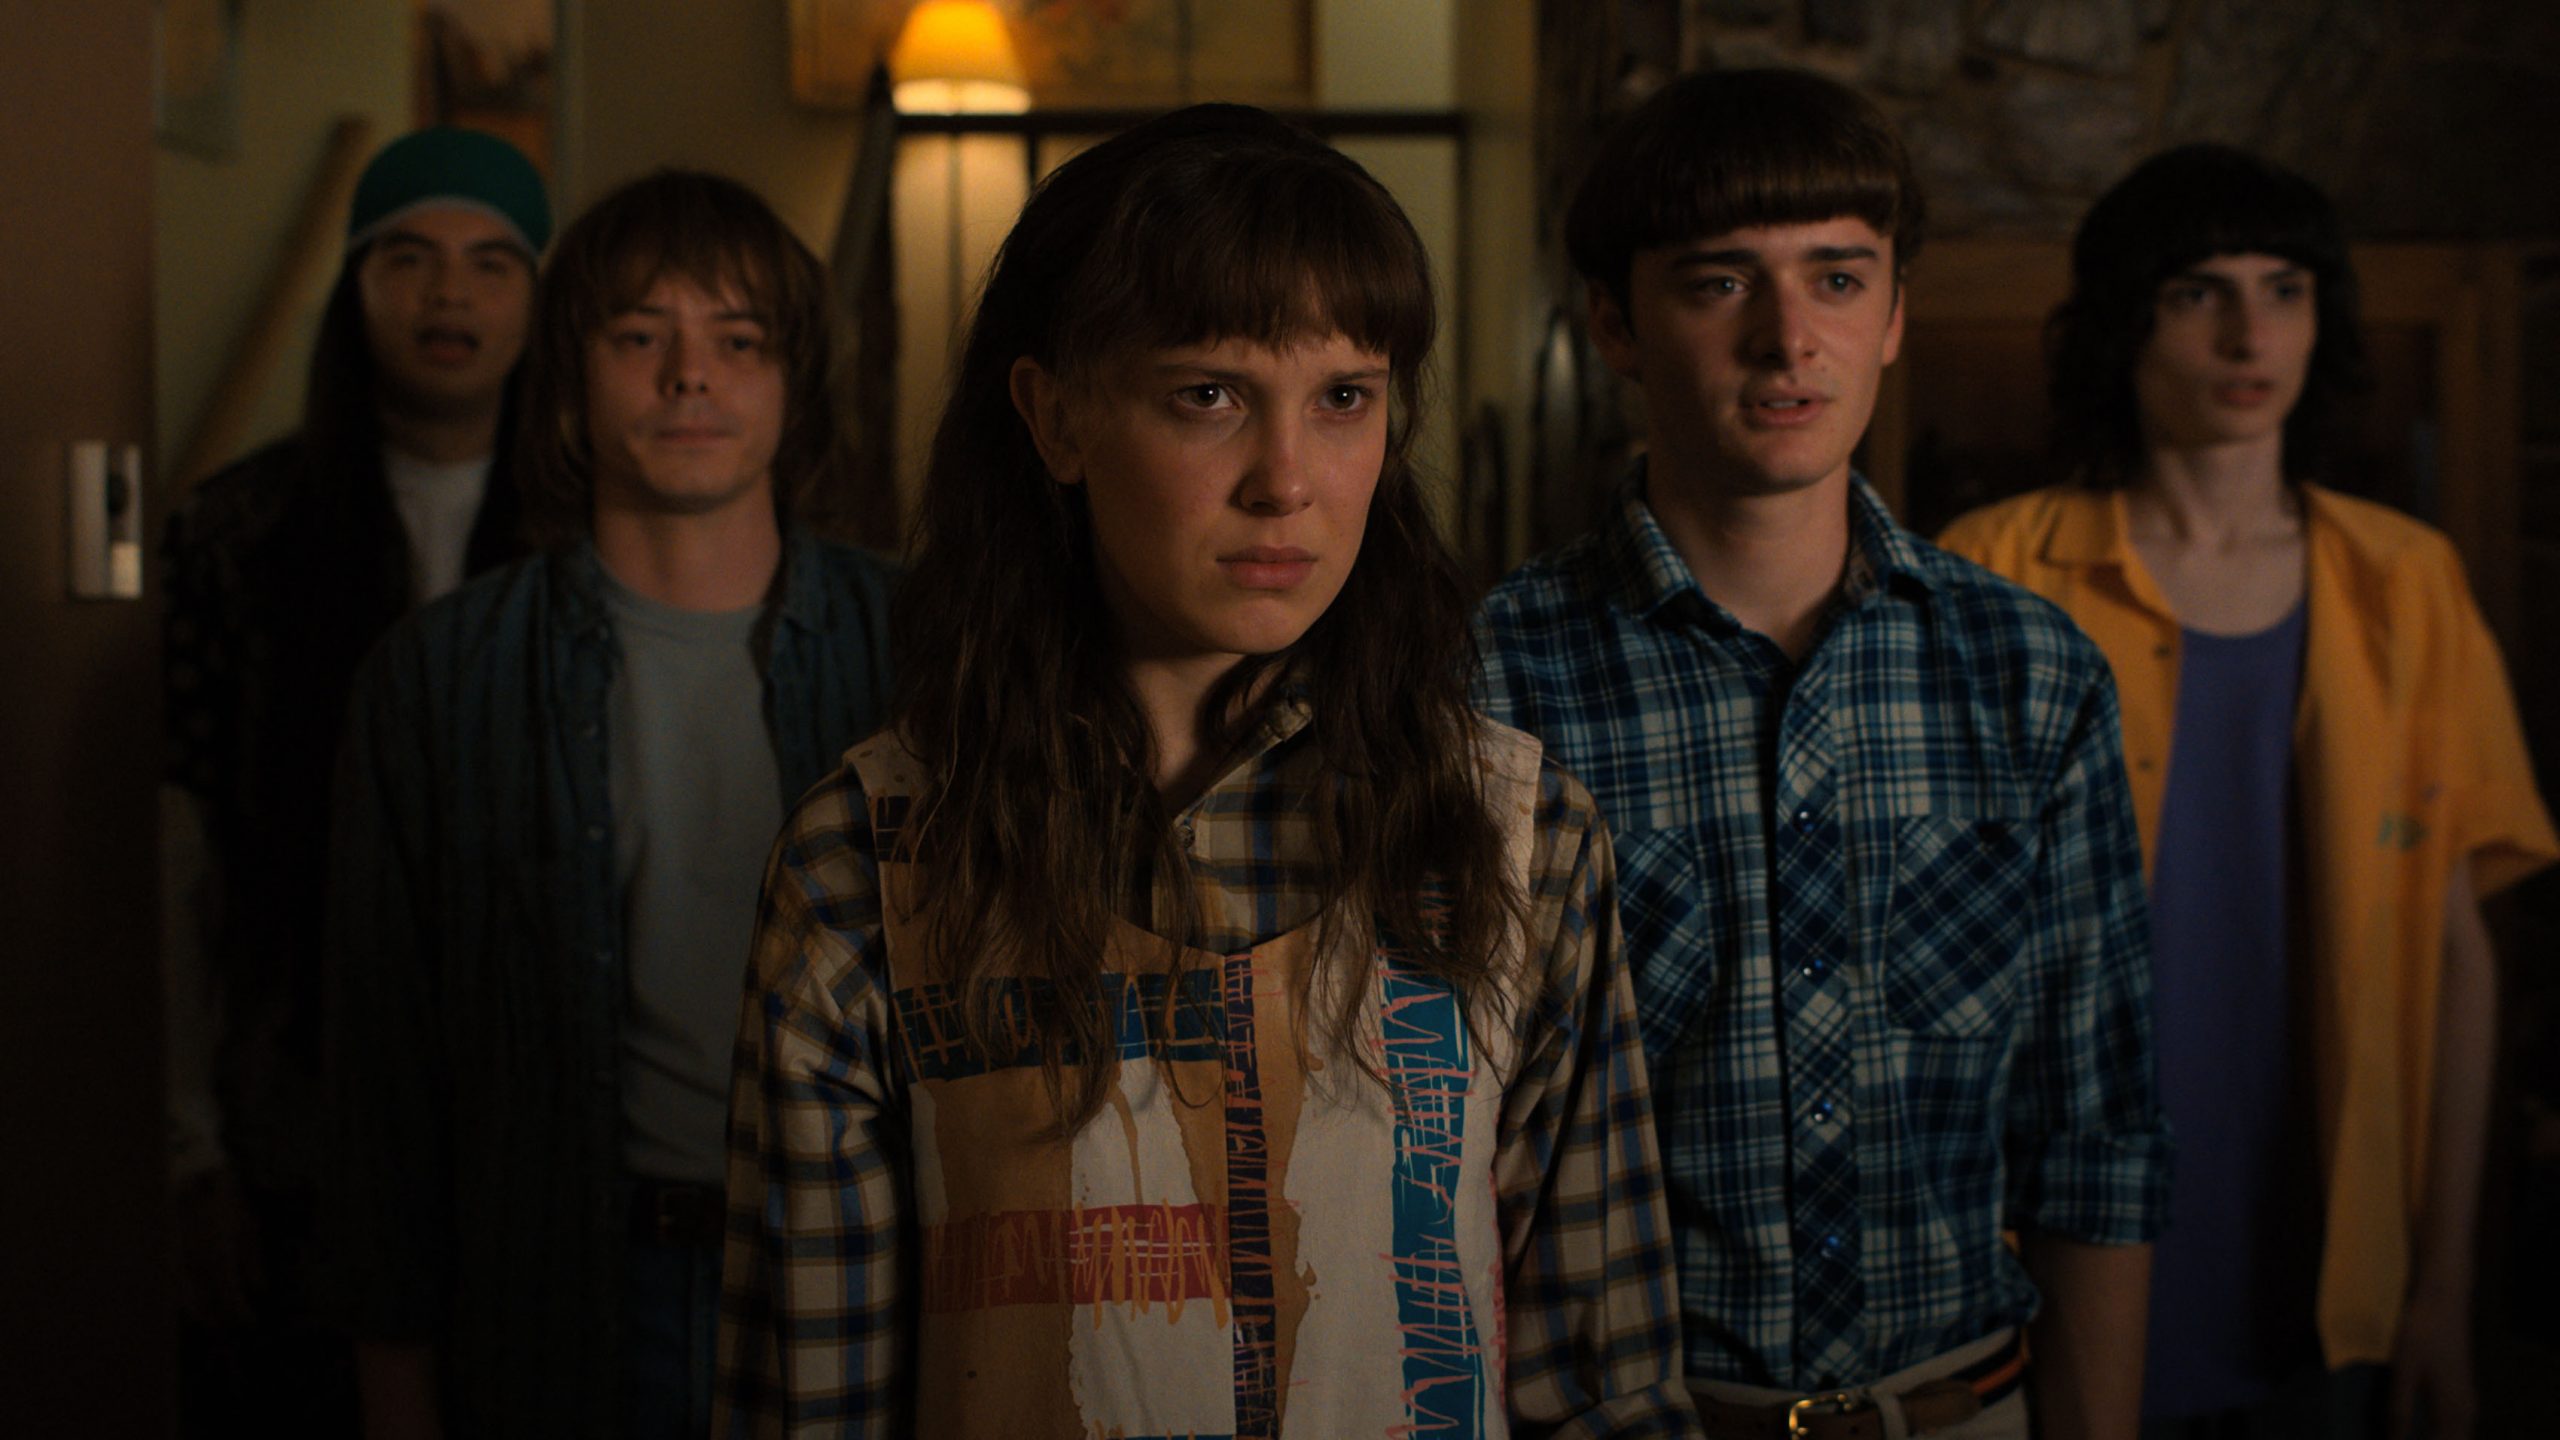 Noah Schnapp Hints at More Deaths on Stranger Things 4